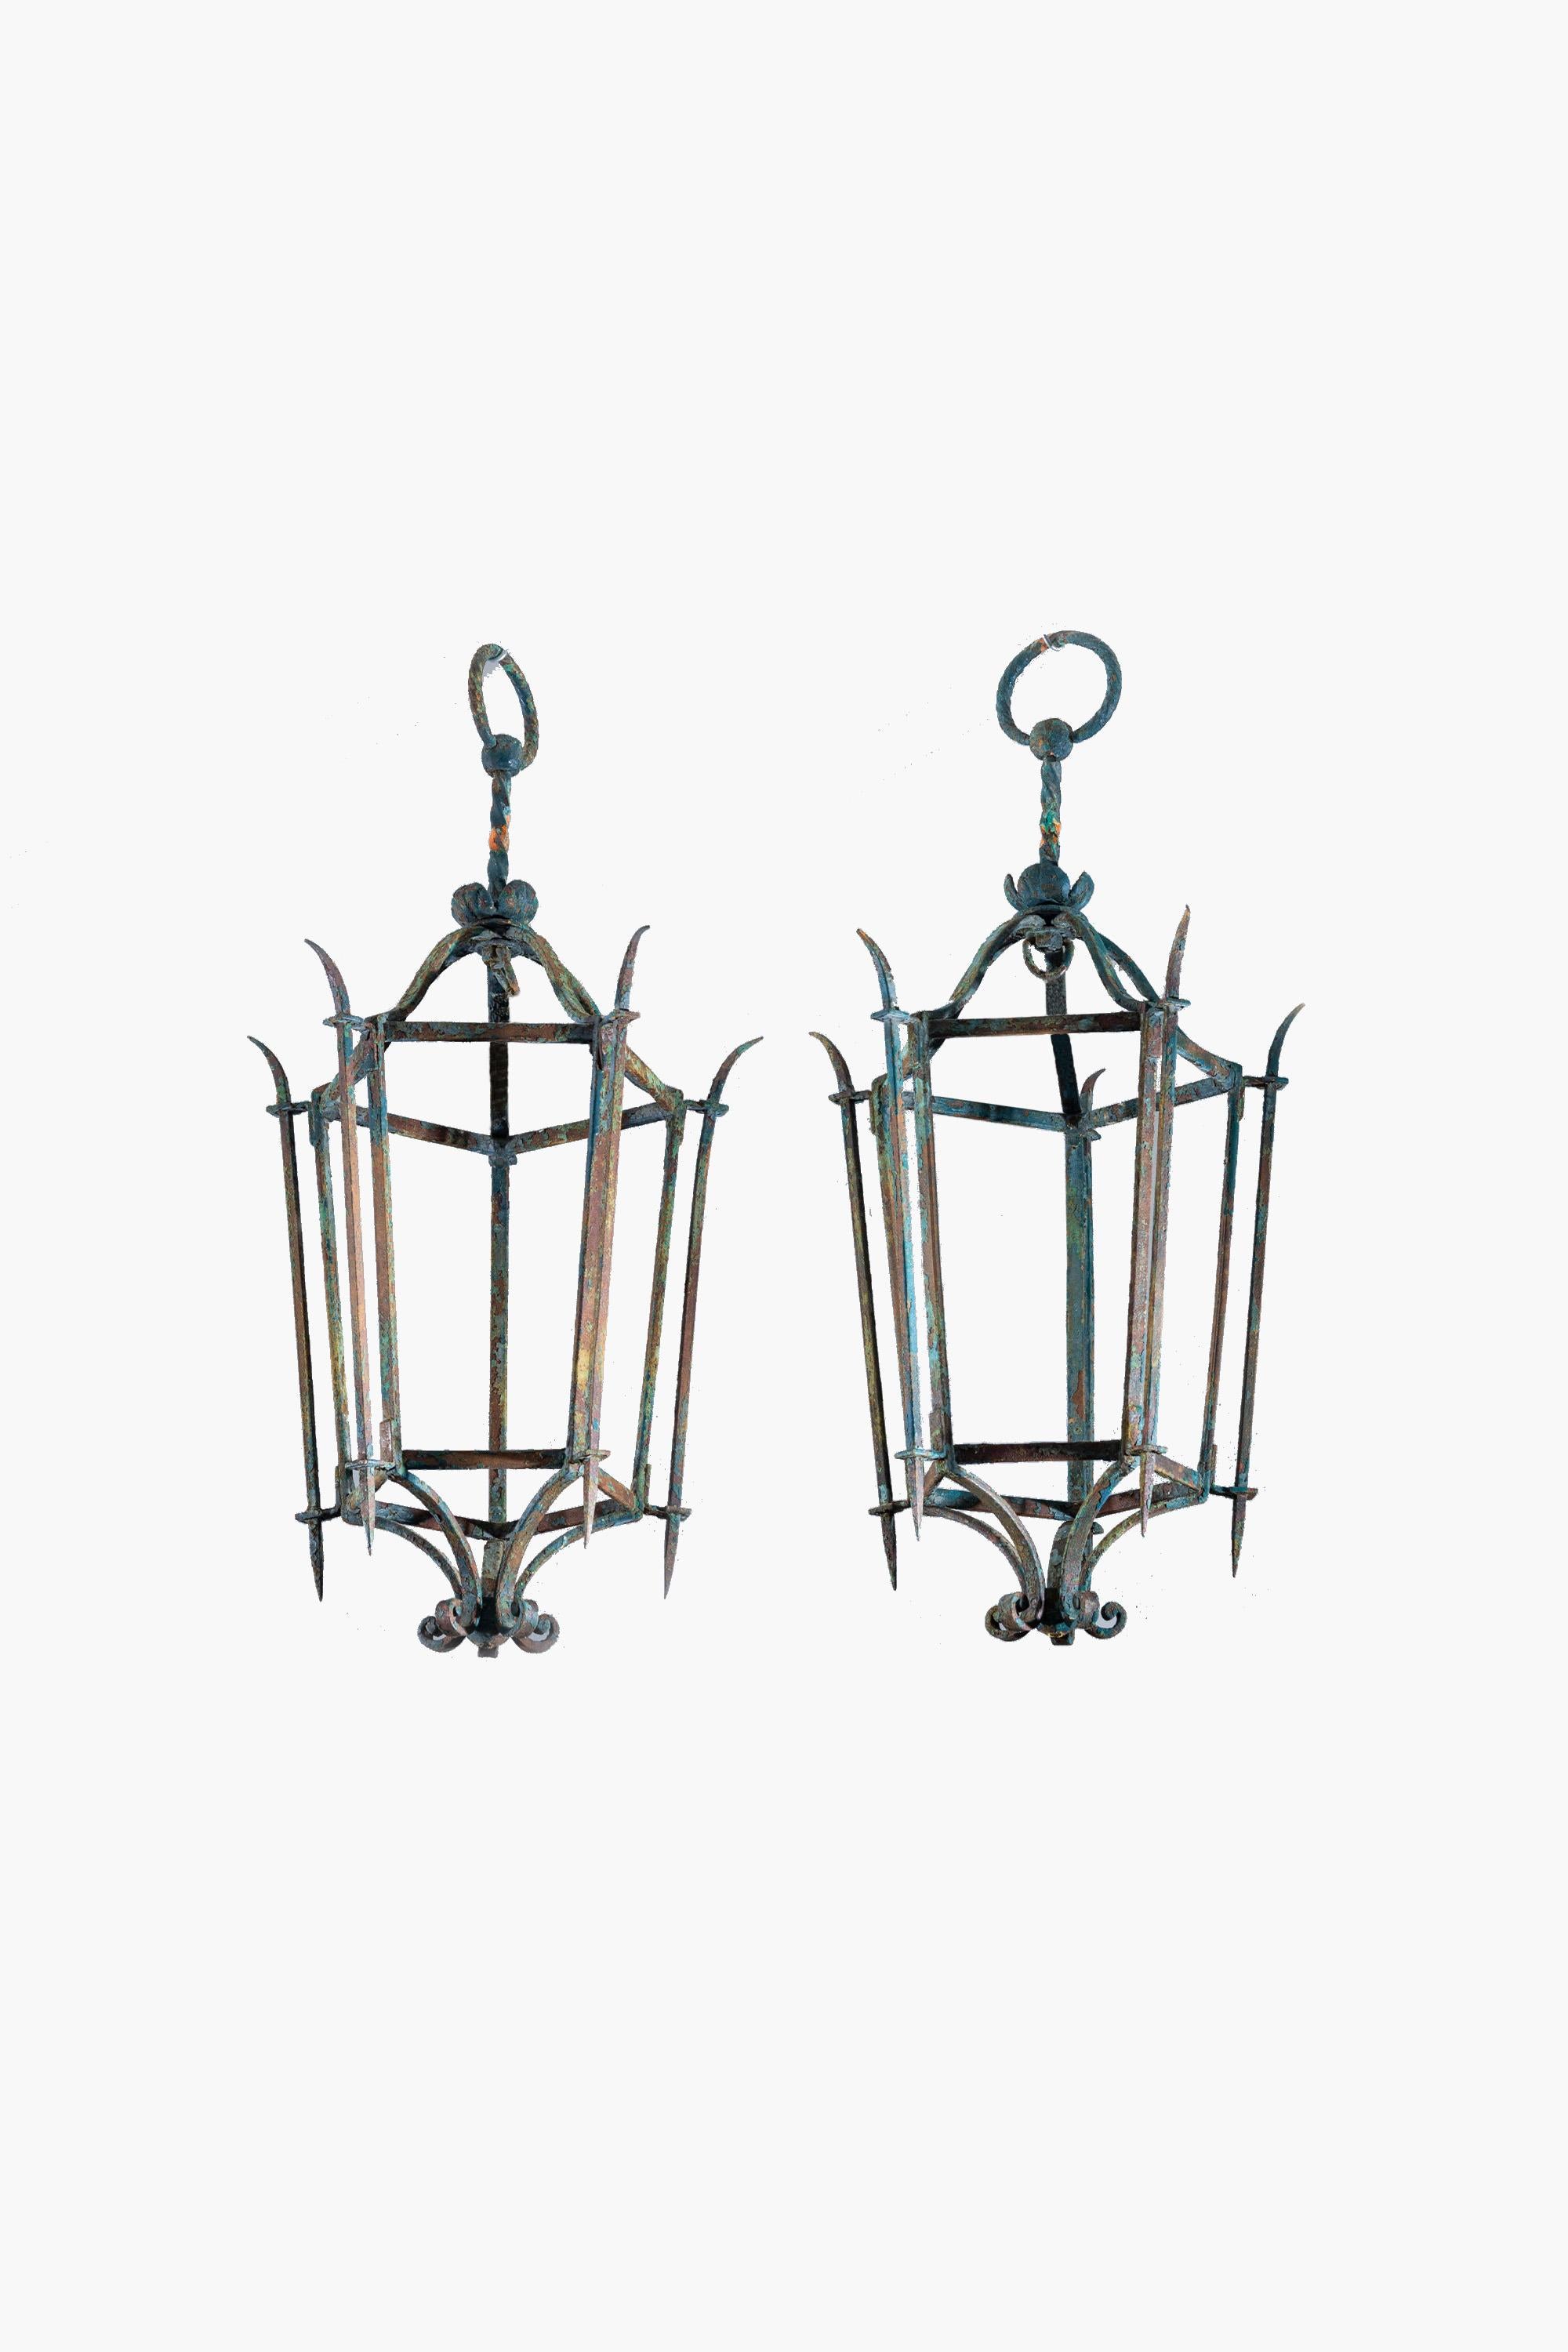 An impressive pair of 1950s Italian wrought iron hall or porch lanterns attributed to Paolo Buffa.

The metalwork has a wonderful overall patina from oxidisation. The present condition could be preserved and lacquered, or stripped and polished based